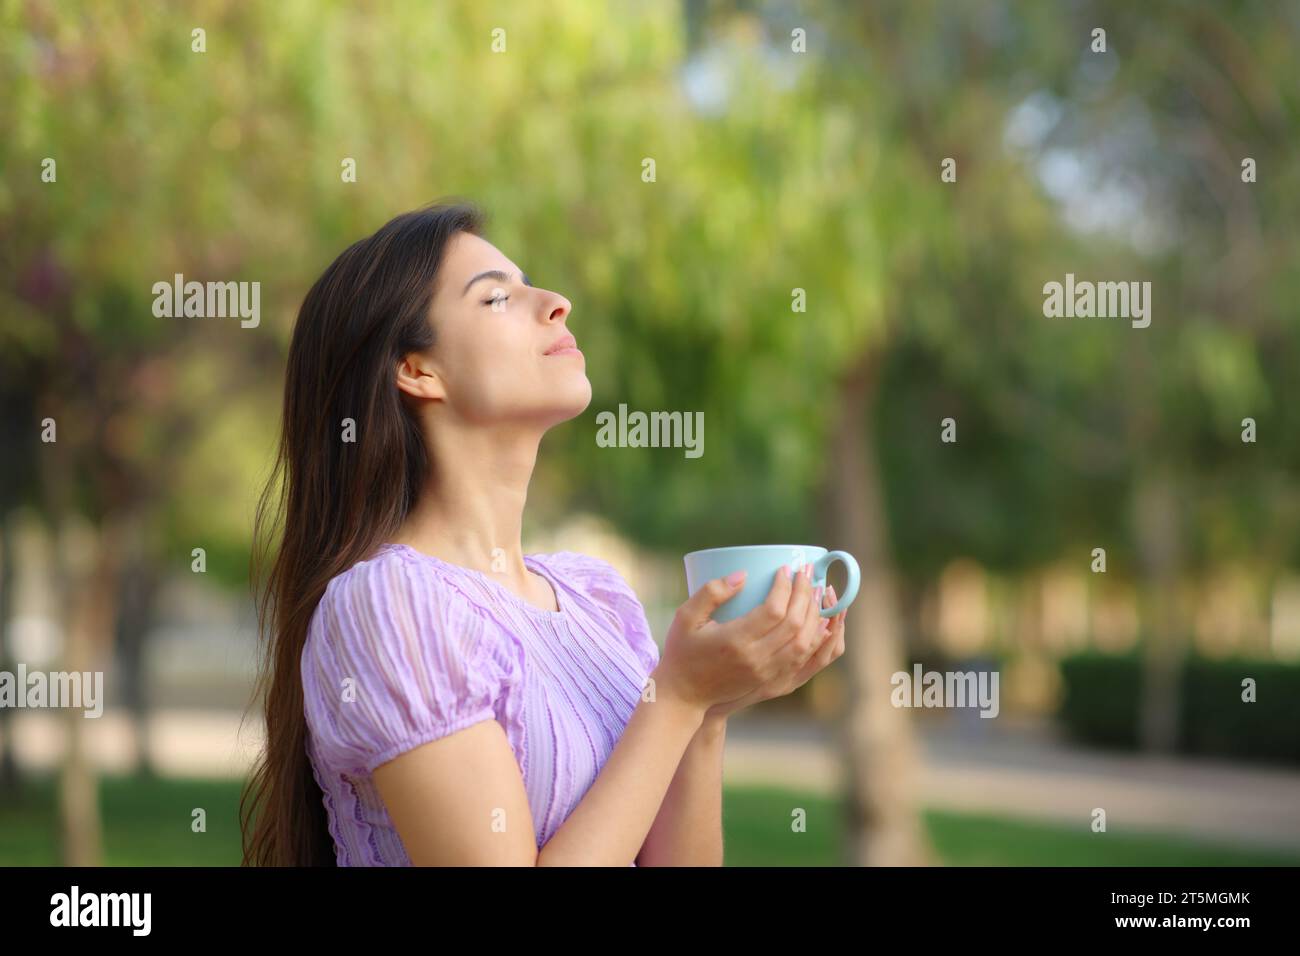 Profile of a woman breathing drinking coffee in a green park Stock Photo